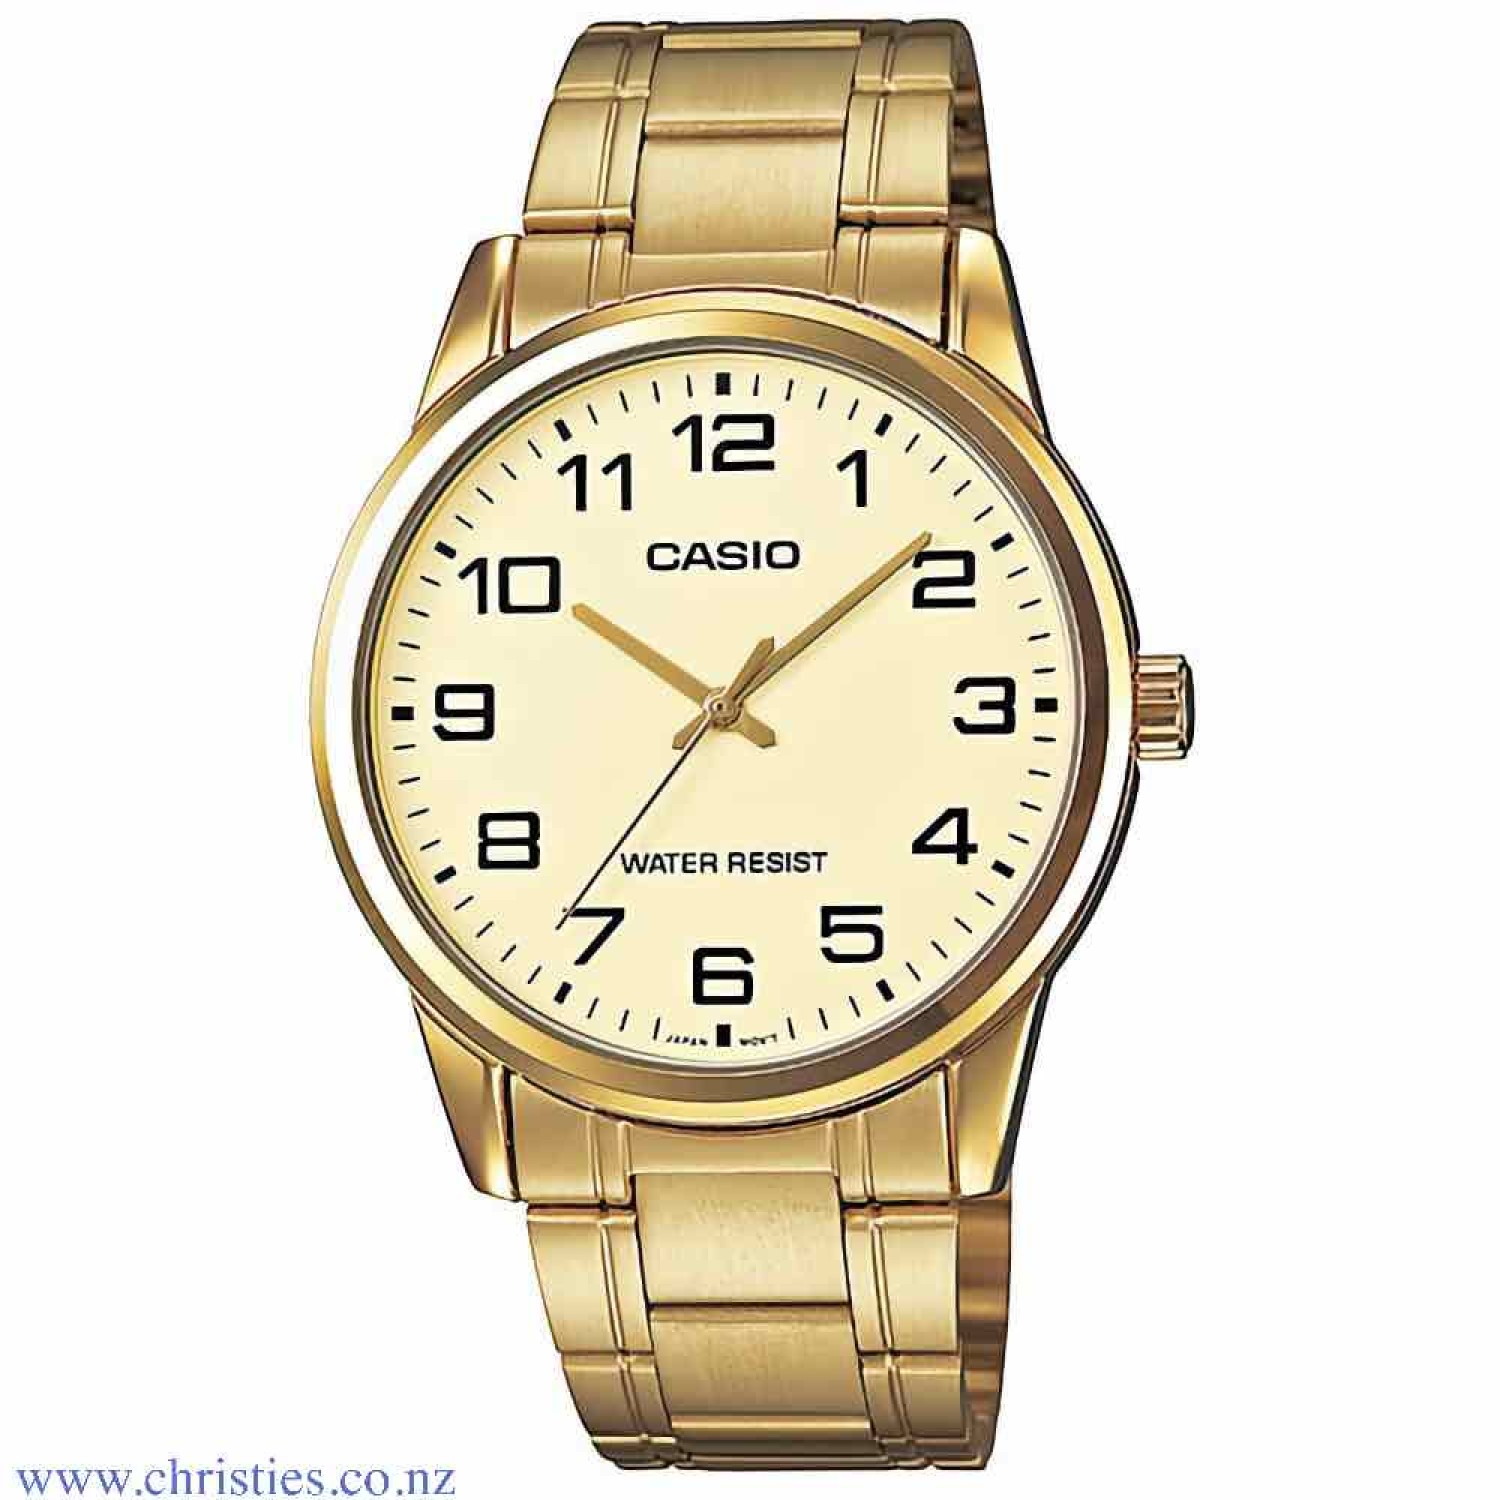 MTPV001G-9B Casio Mens Stainless Steel Watch. From Casio an analogue stainless steel with clear easy to read dial and water resistant. Afterpay - Split your purchase into 4 instalments - Pay for your purchase over 4 instalments, due every two weeks. You’l